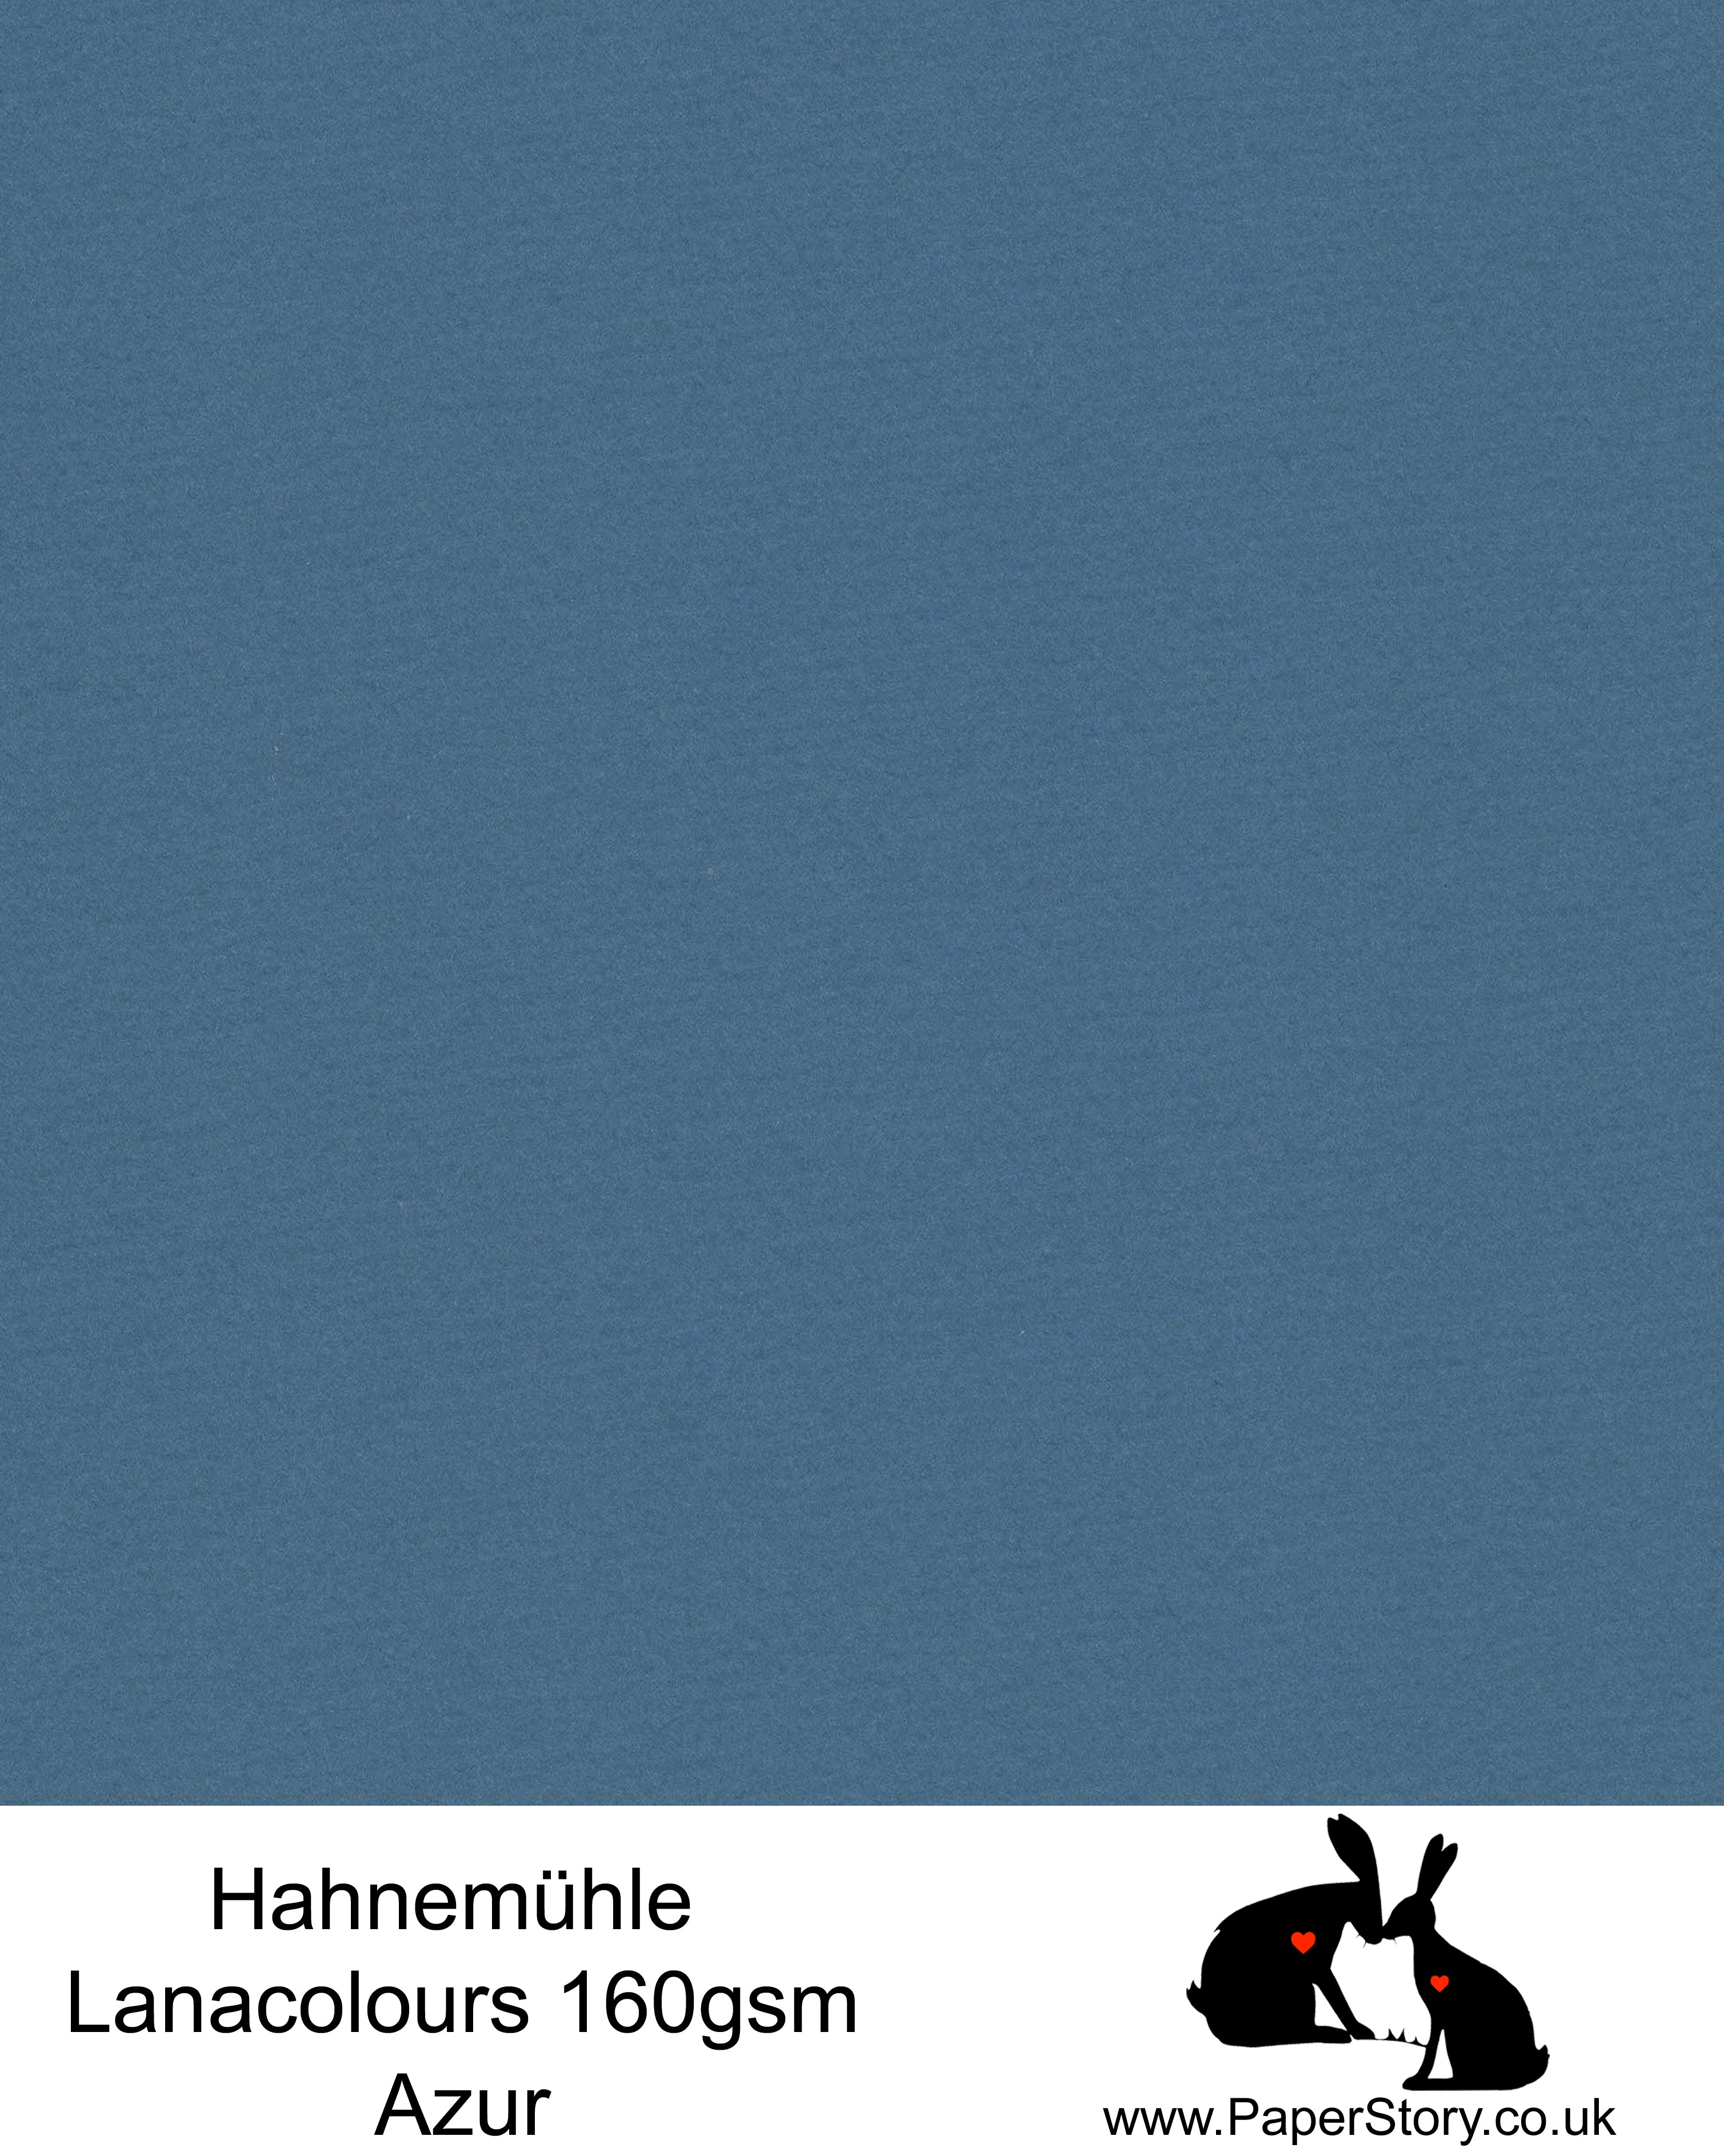 Hahnemühle Lana Colours pastel Azue Blue hammered paper 160 gsm. Artist Premium Pastel and Papercutting Papers 160 gsm often described as hammered paper. This high quality artist paper, can be used for papercutting as well as mixed media